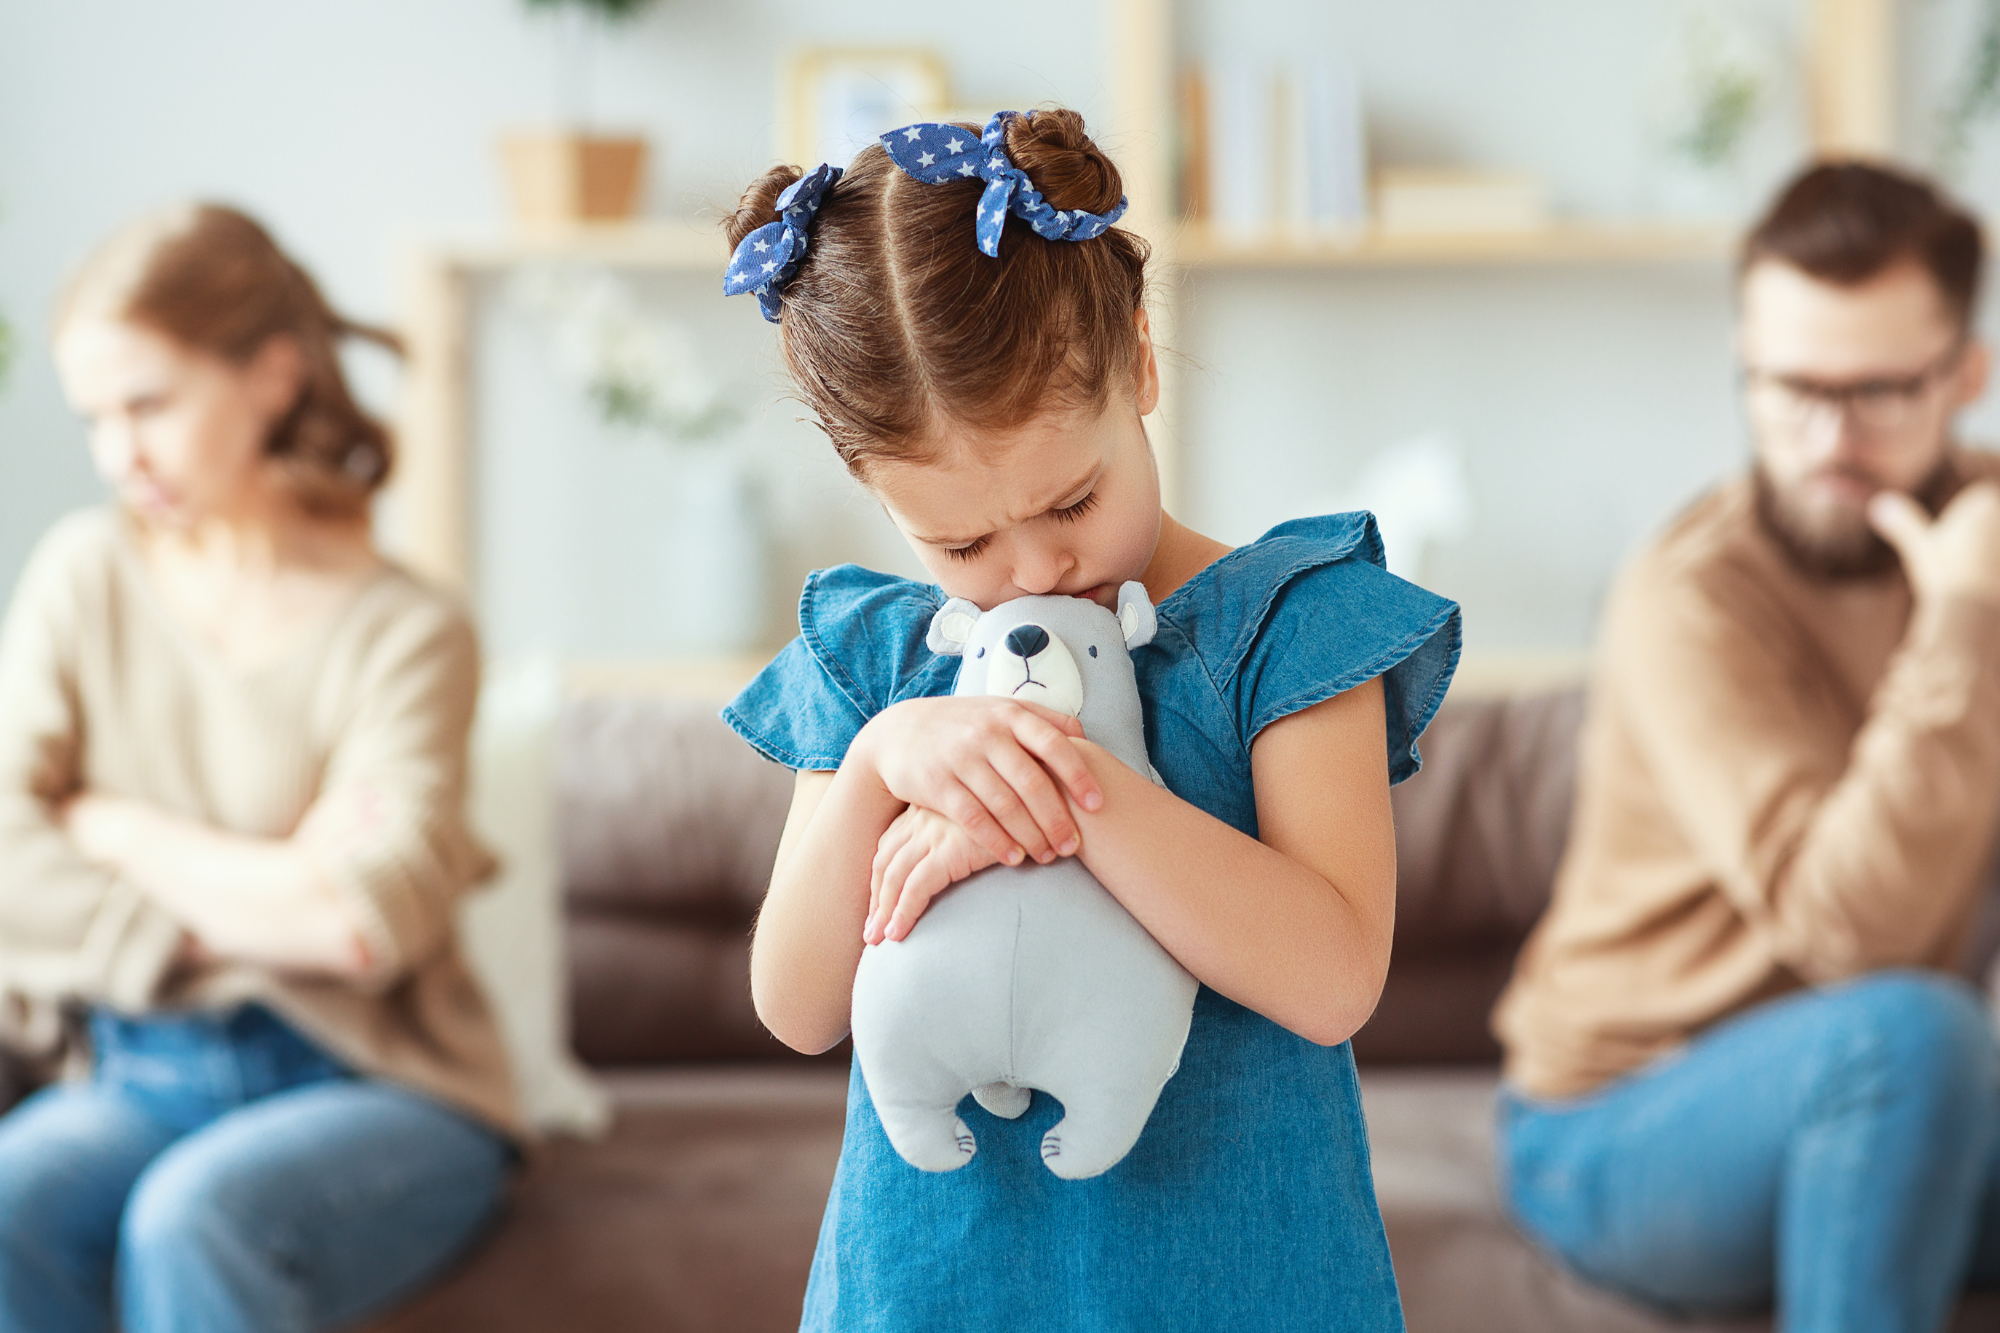 Sad little girl in blue holding stuffed animal while parents in background look away from each other. Nine ways a Man Can make a Decision to Divorce the Mother of his Children